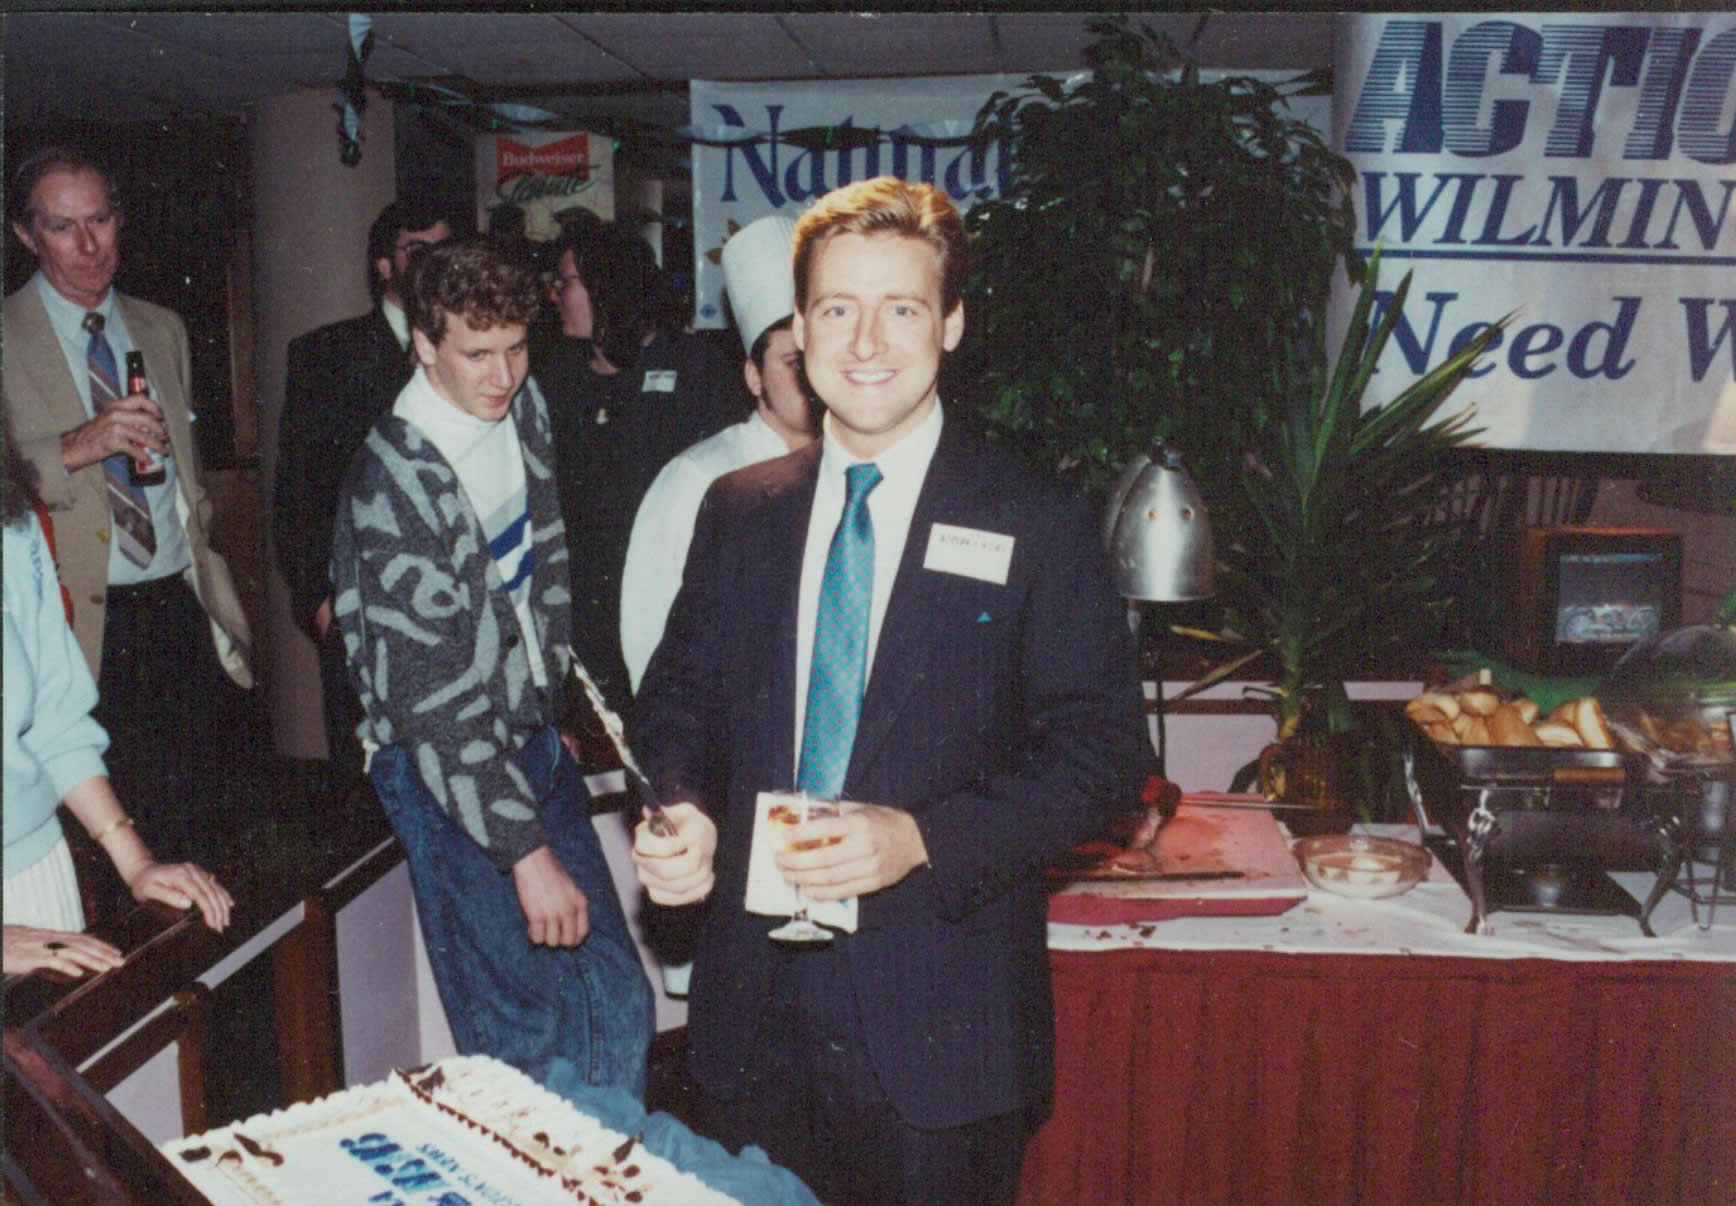 PATT NODAY: (center) appearing live in Wilmington, North Carolina in 1990 to cut the cake at the big 